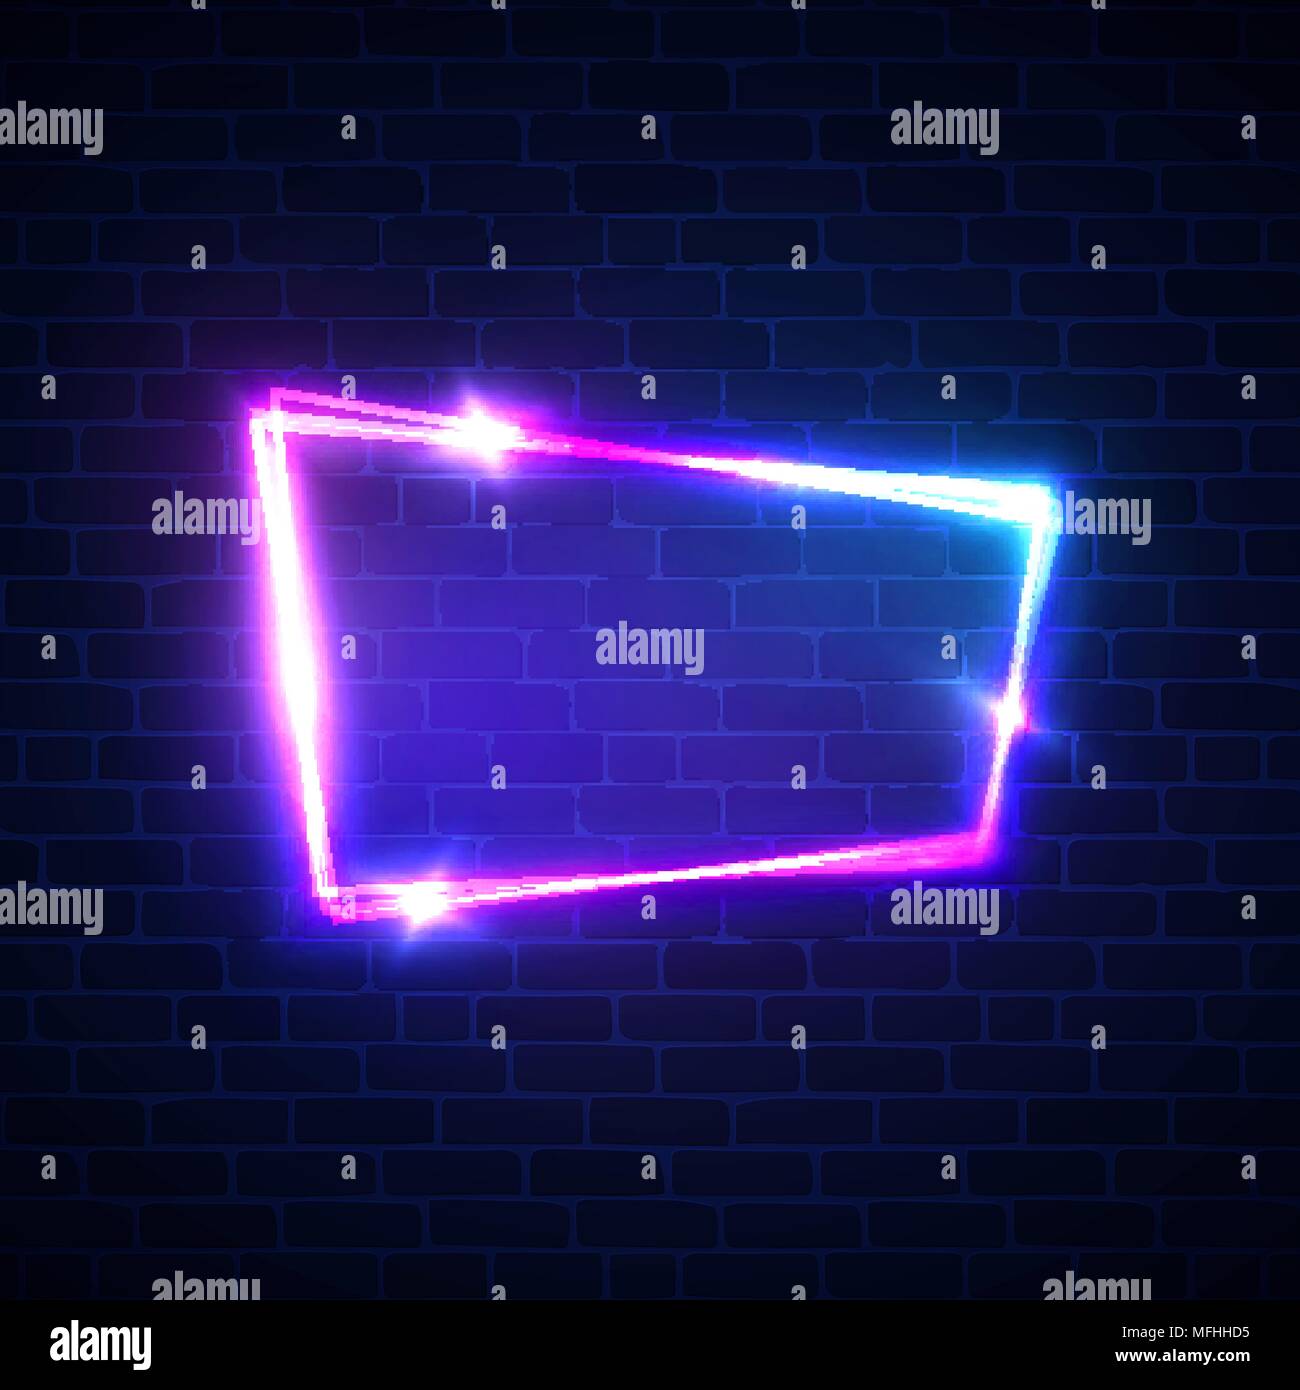 Night club neon sign on brick wall background. Blank 3d retro frame with shining neon lights. Disco show advertising street banner with glowing on brick texture. Color vector illustration in 80s style Stock Vector